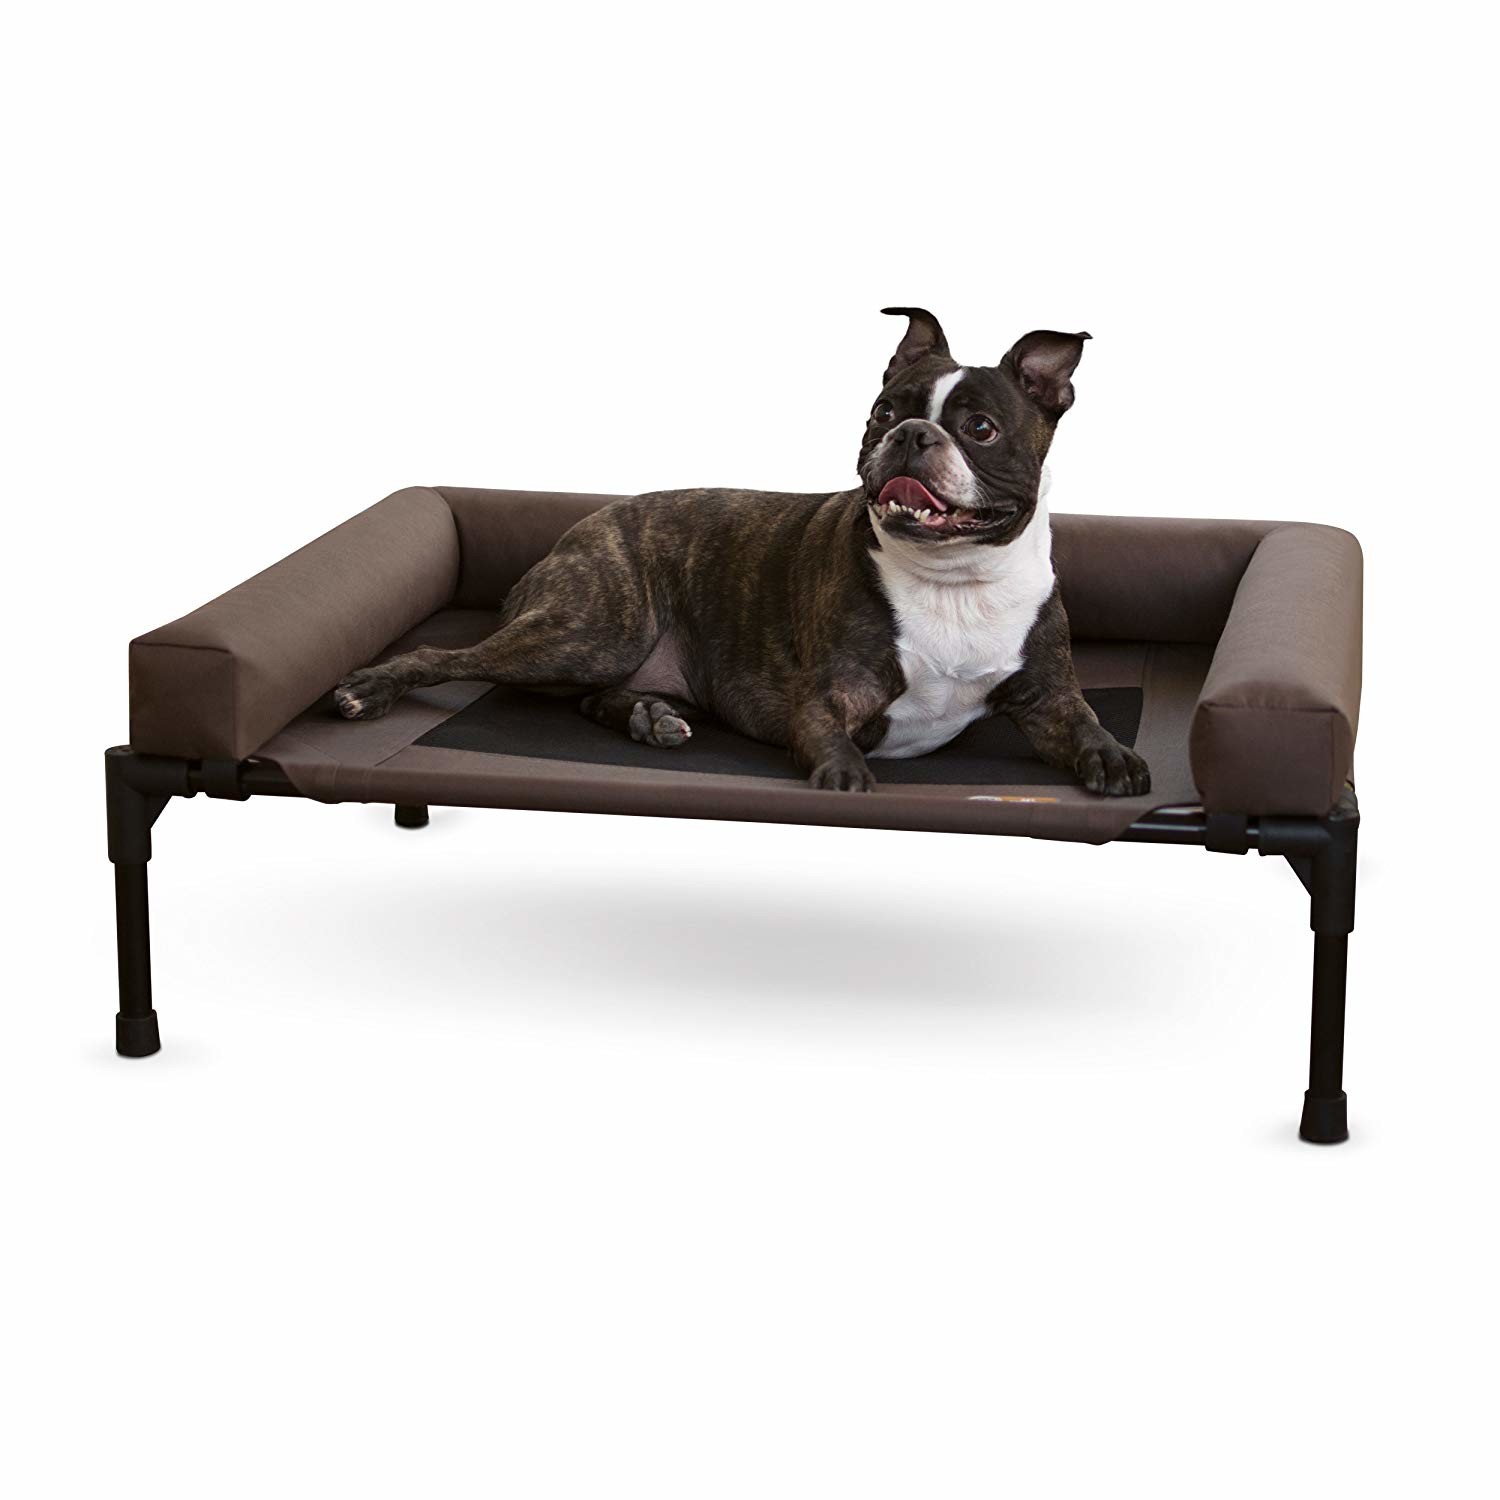  20cm Elevated Outdoor Dog Bed Manufactures